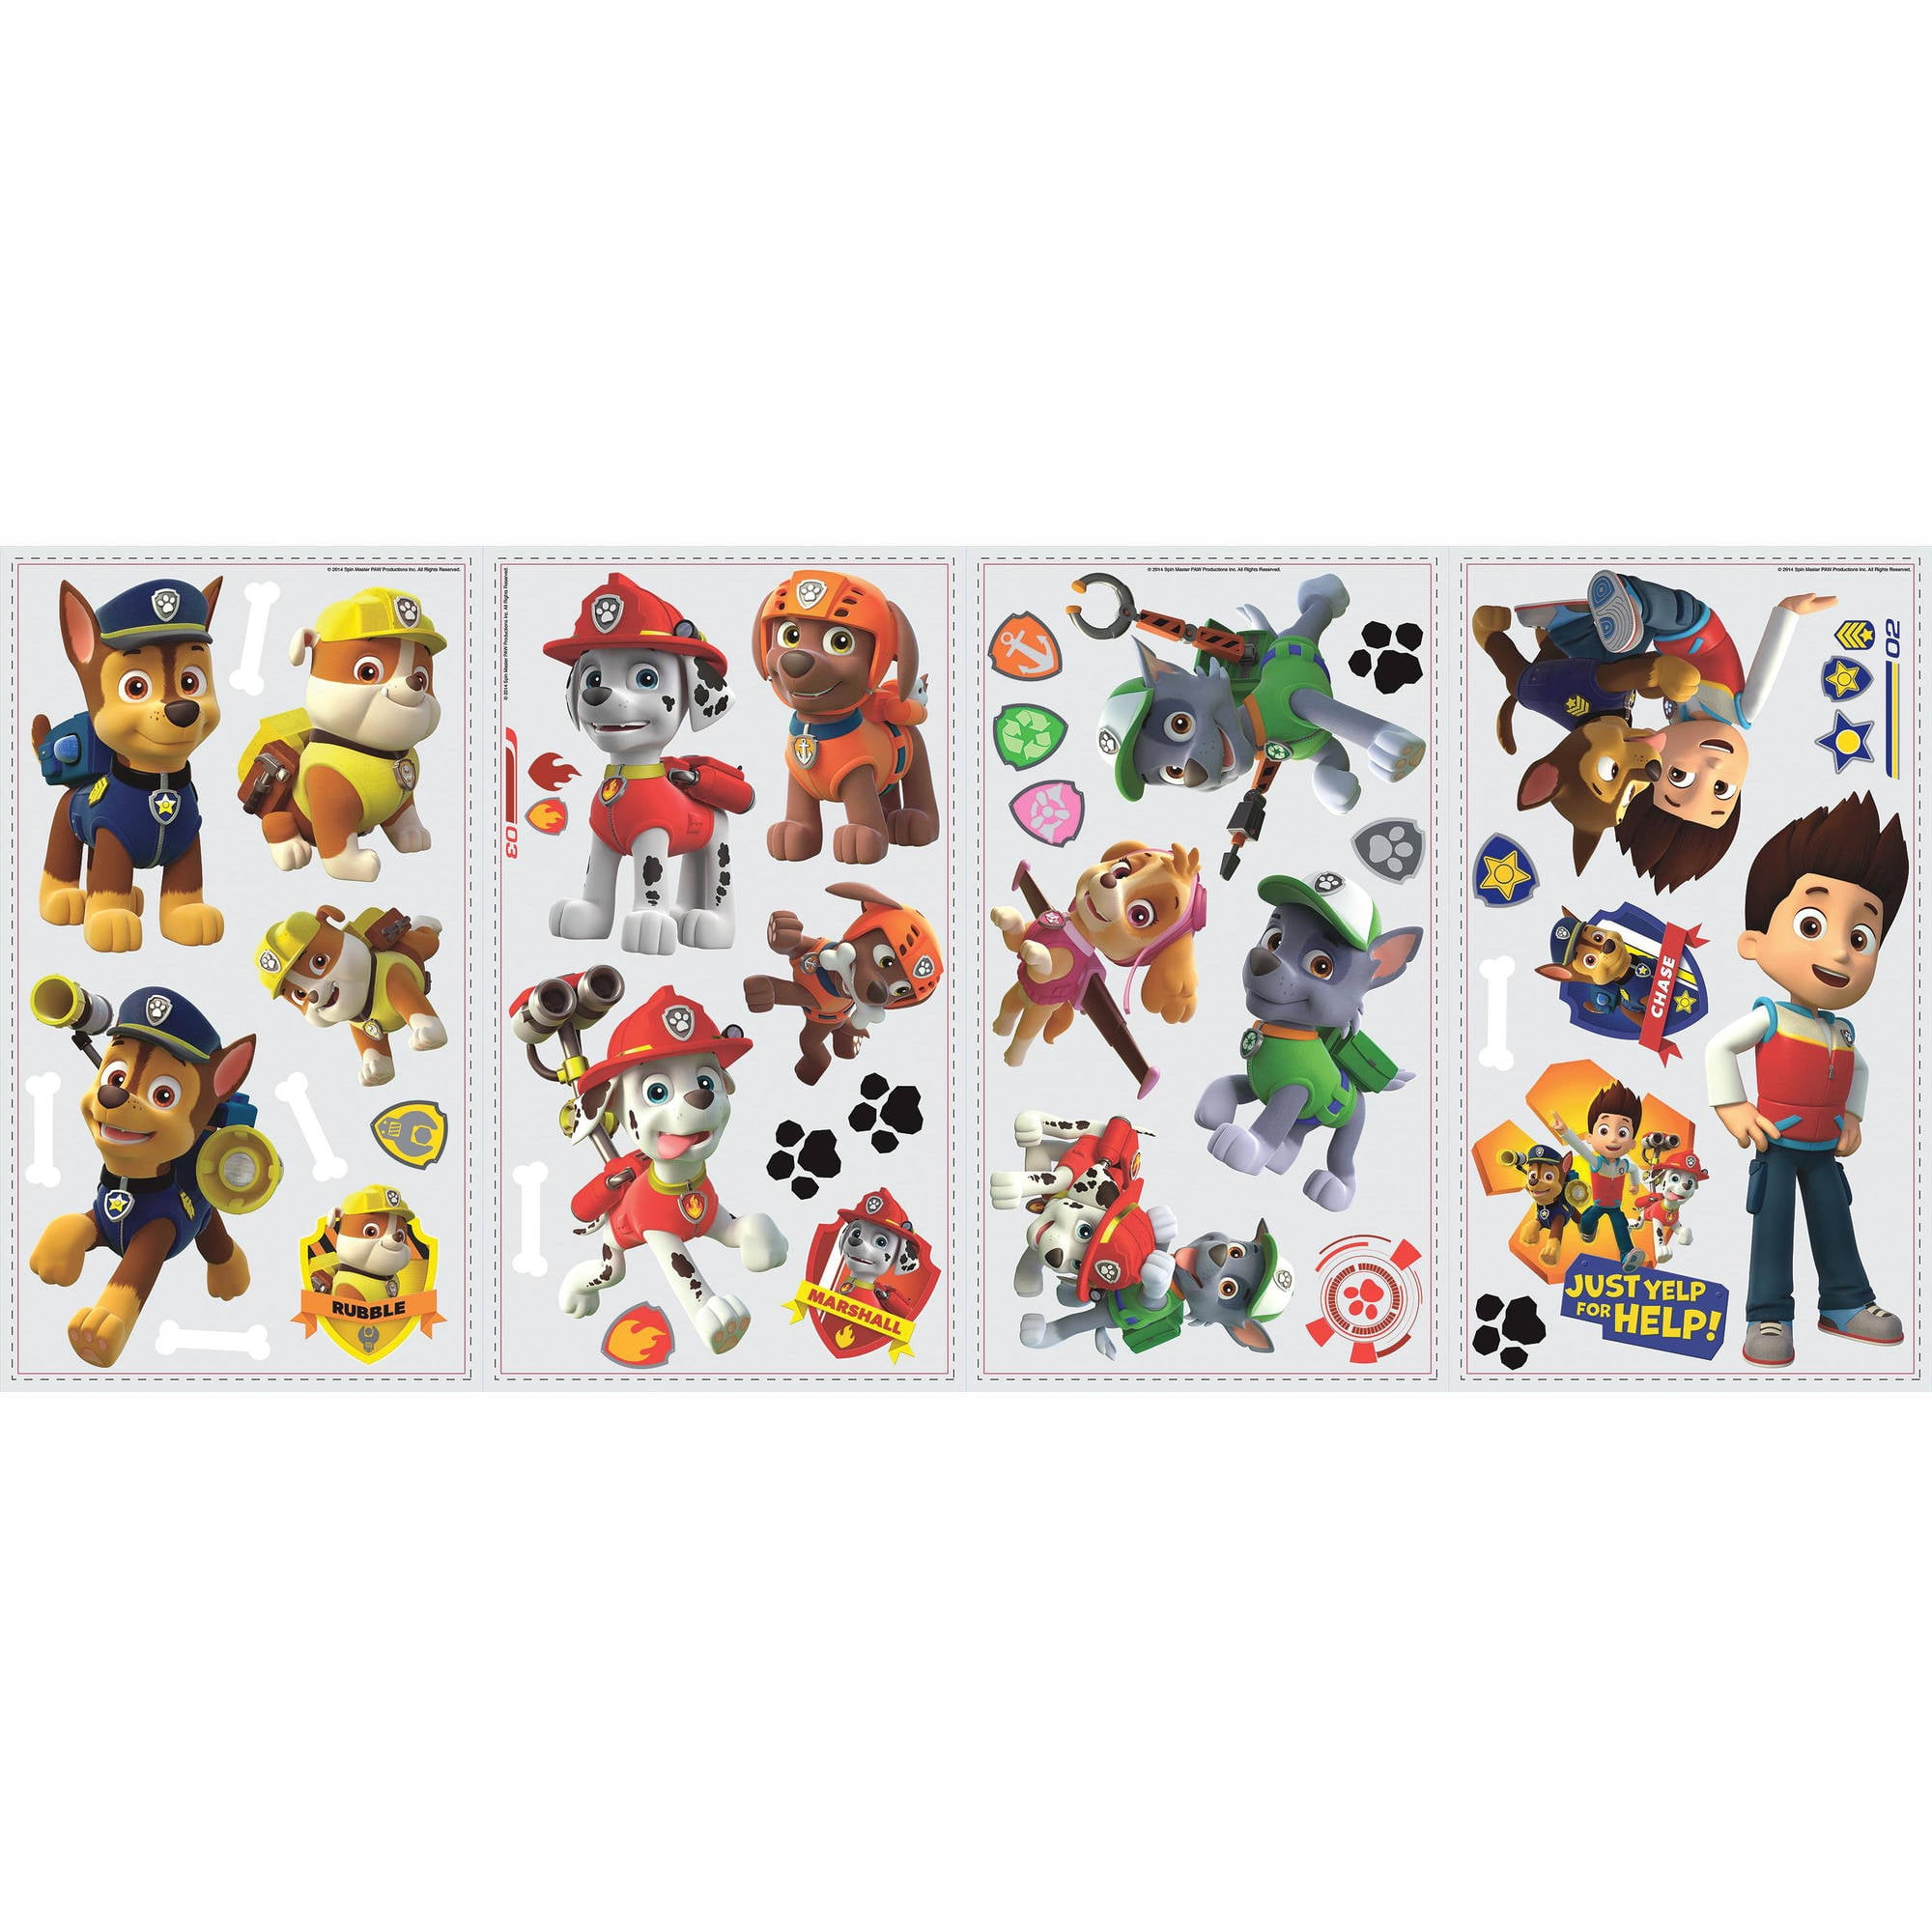 Details about   3D Paw Patrol Wallpaper Stickers Removable for Kids